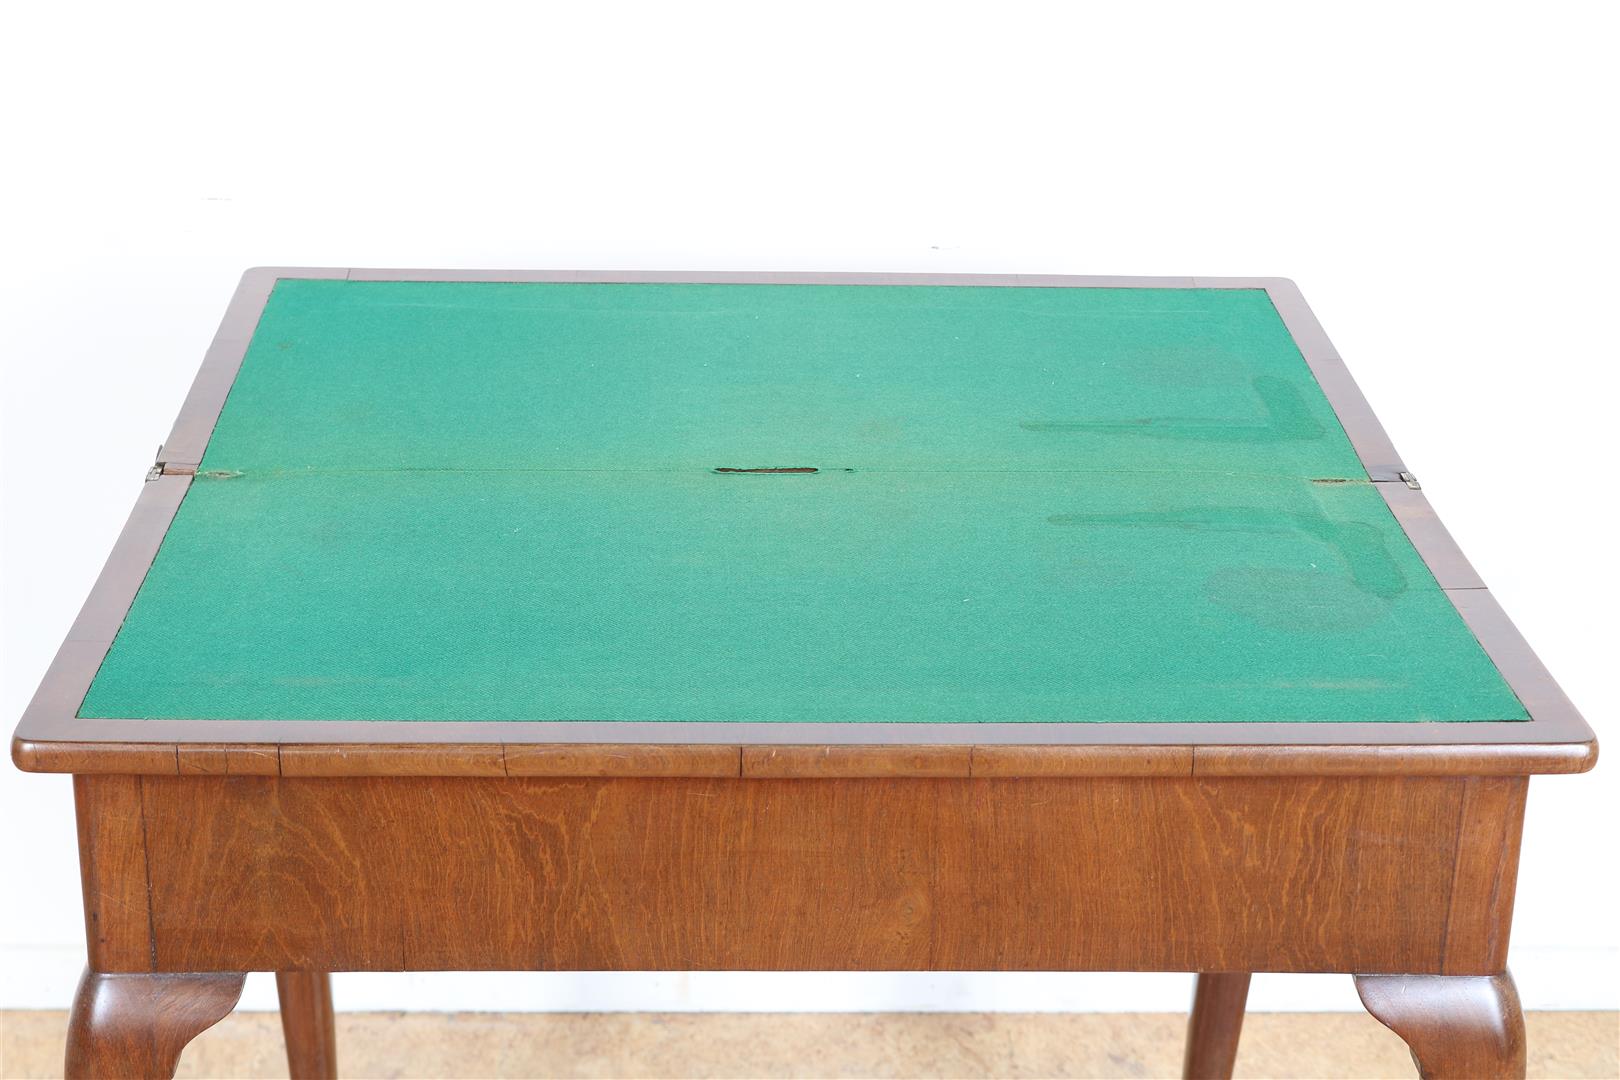 Mahogany Queen Anne style game table with green felt inlaid top on saber legs, 19th century, 74 x 70 - Image 2 of 5